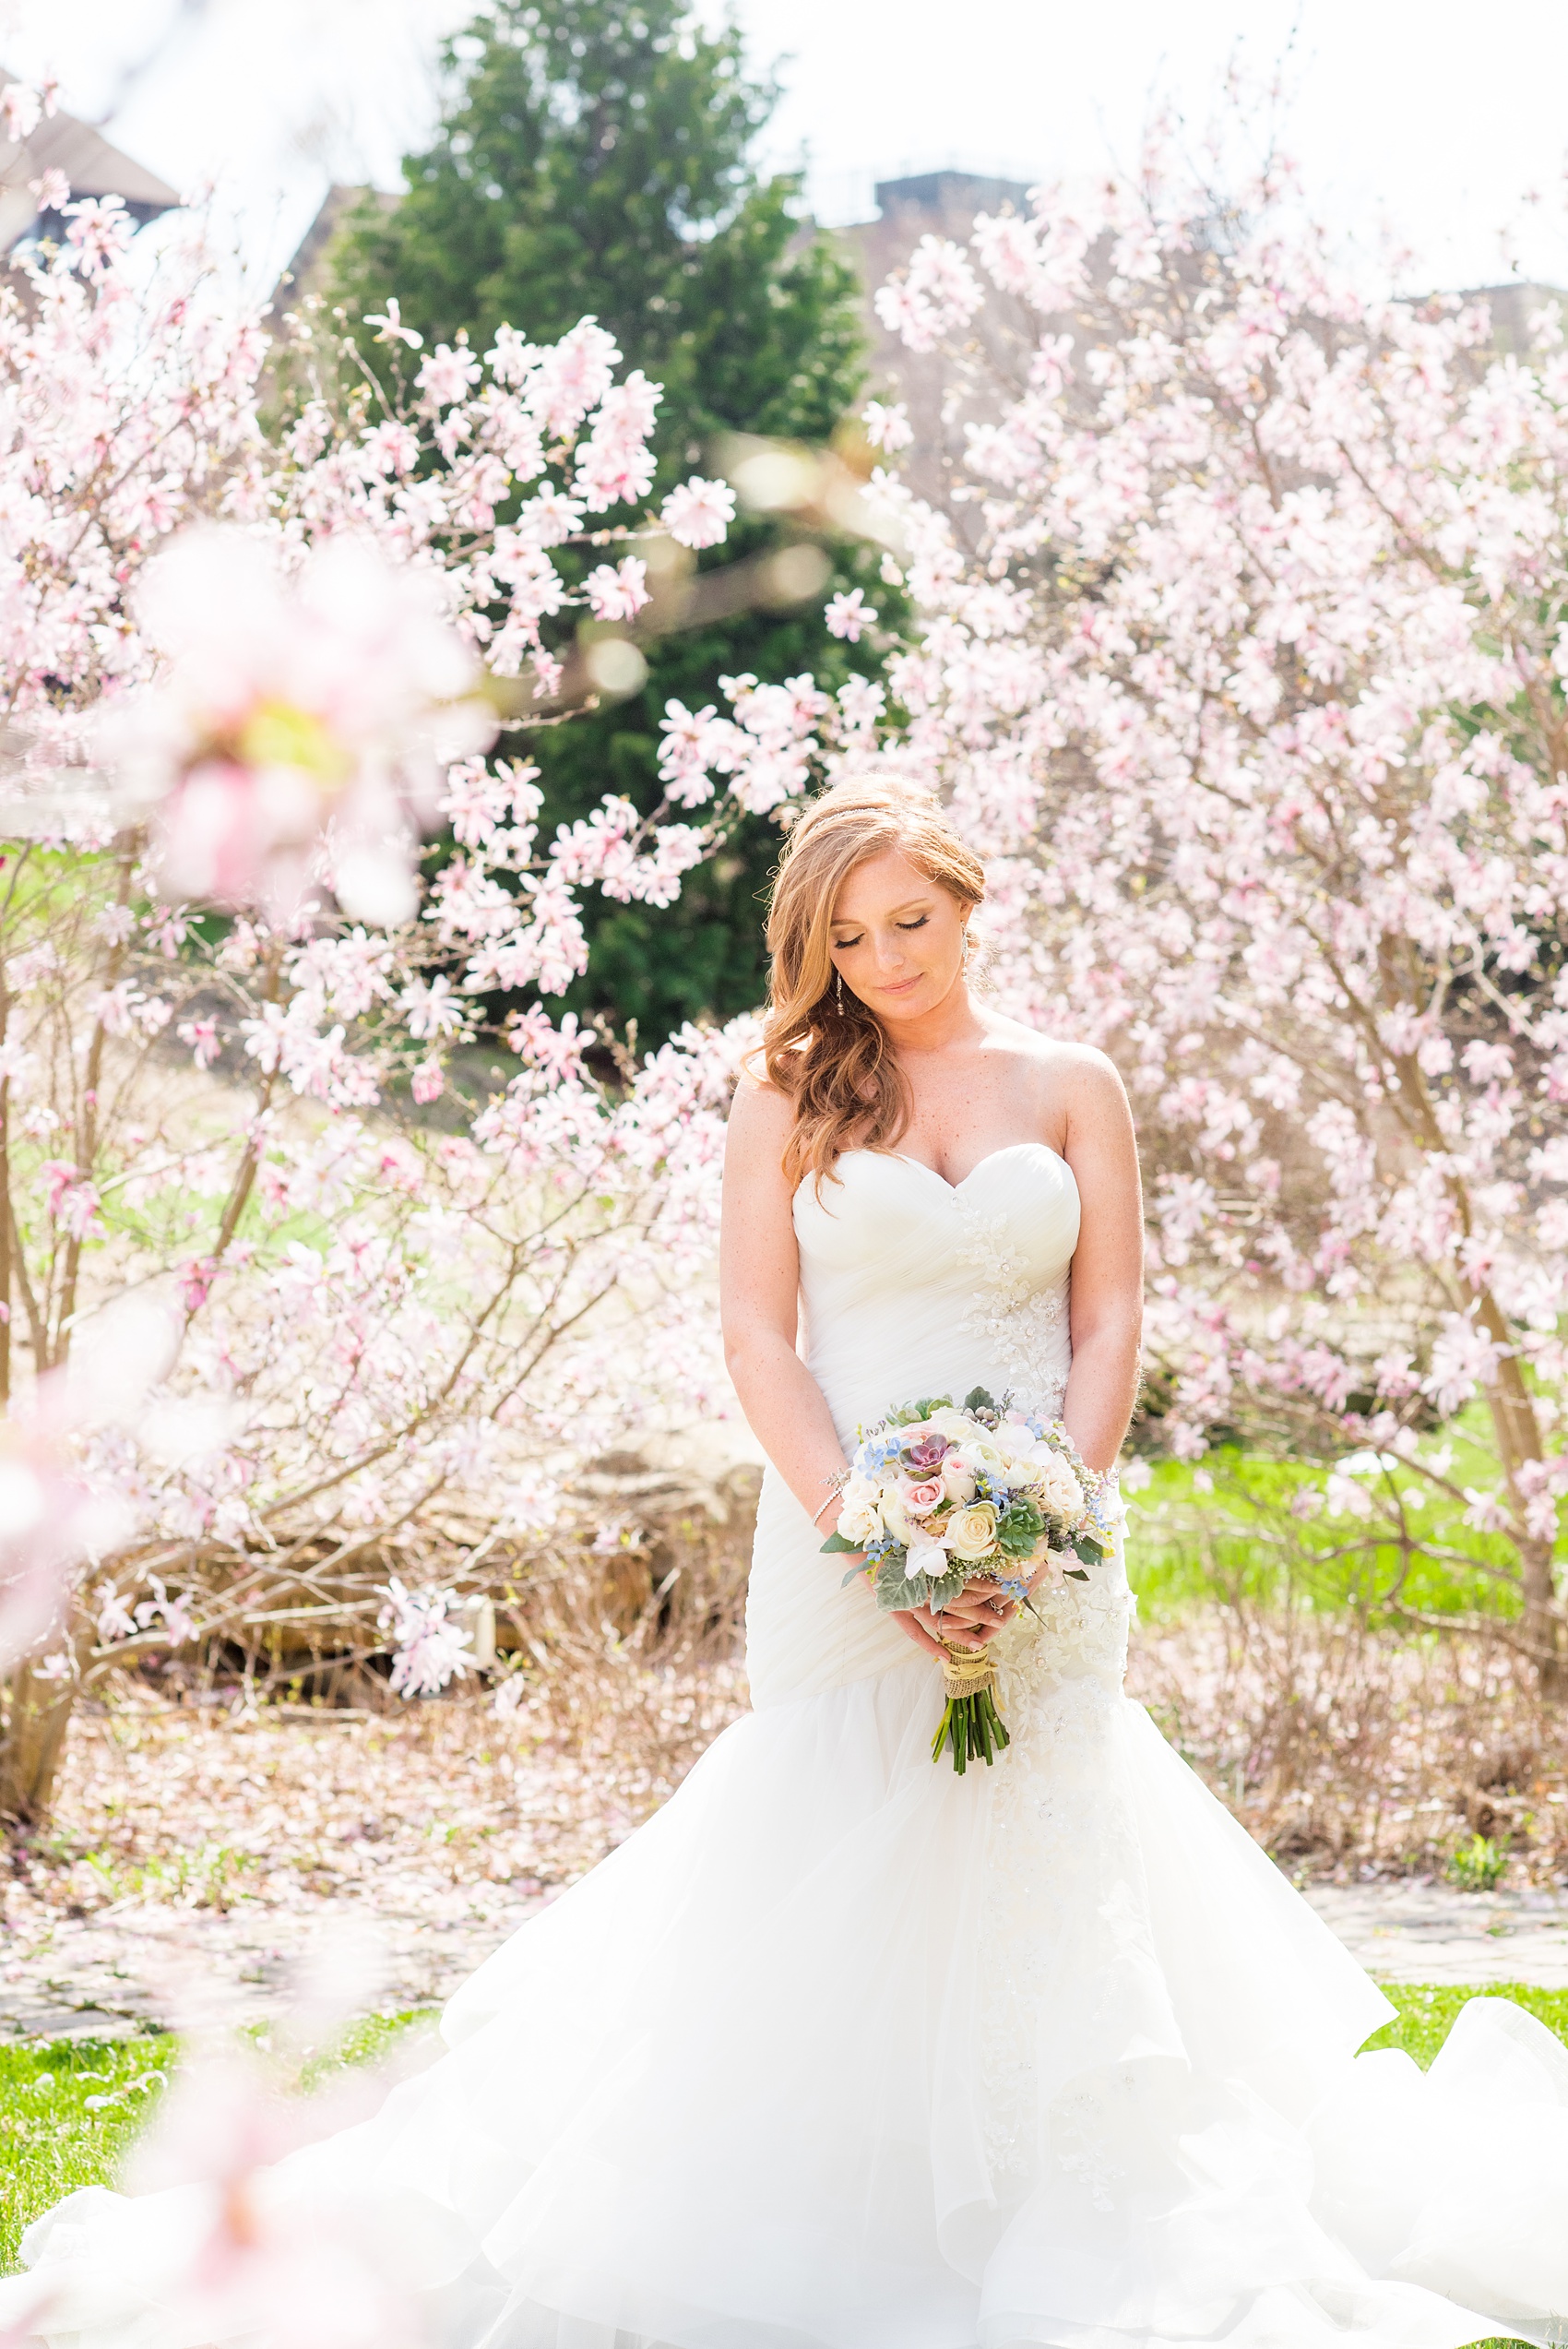 Crystal Springs Resort wedding photos in New Jersey, with photographer Mikkel Paige Photography. The couple’s spring wedding had an outdoor ceremony with photos at this rustic, woodsy venue showing their blue and pink palette decor from getting ready to their reception. The bride's love and laughter echoed through the day with spring flowers like cherry blossoms in their pictures! Click through to see their complete wedding recap! #NewJerseywedding #MikkelPaige #NJweddingphotographer #NJphotographer